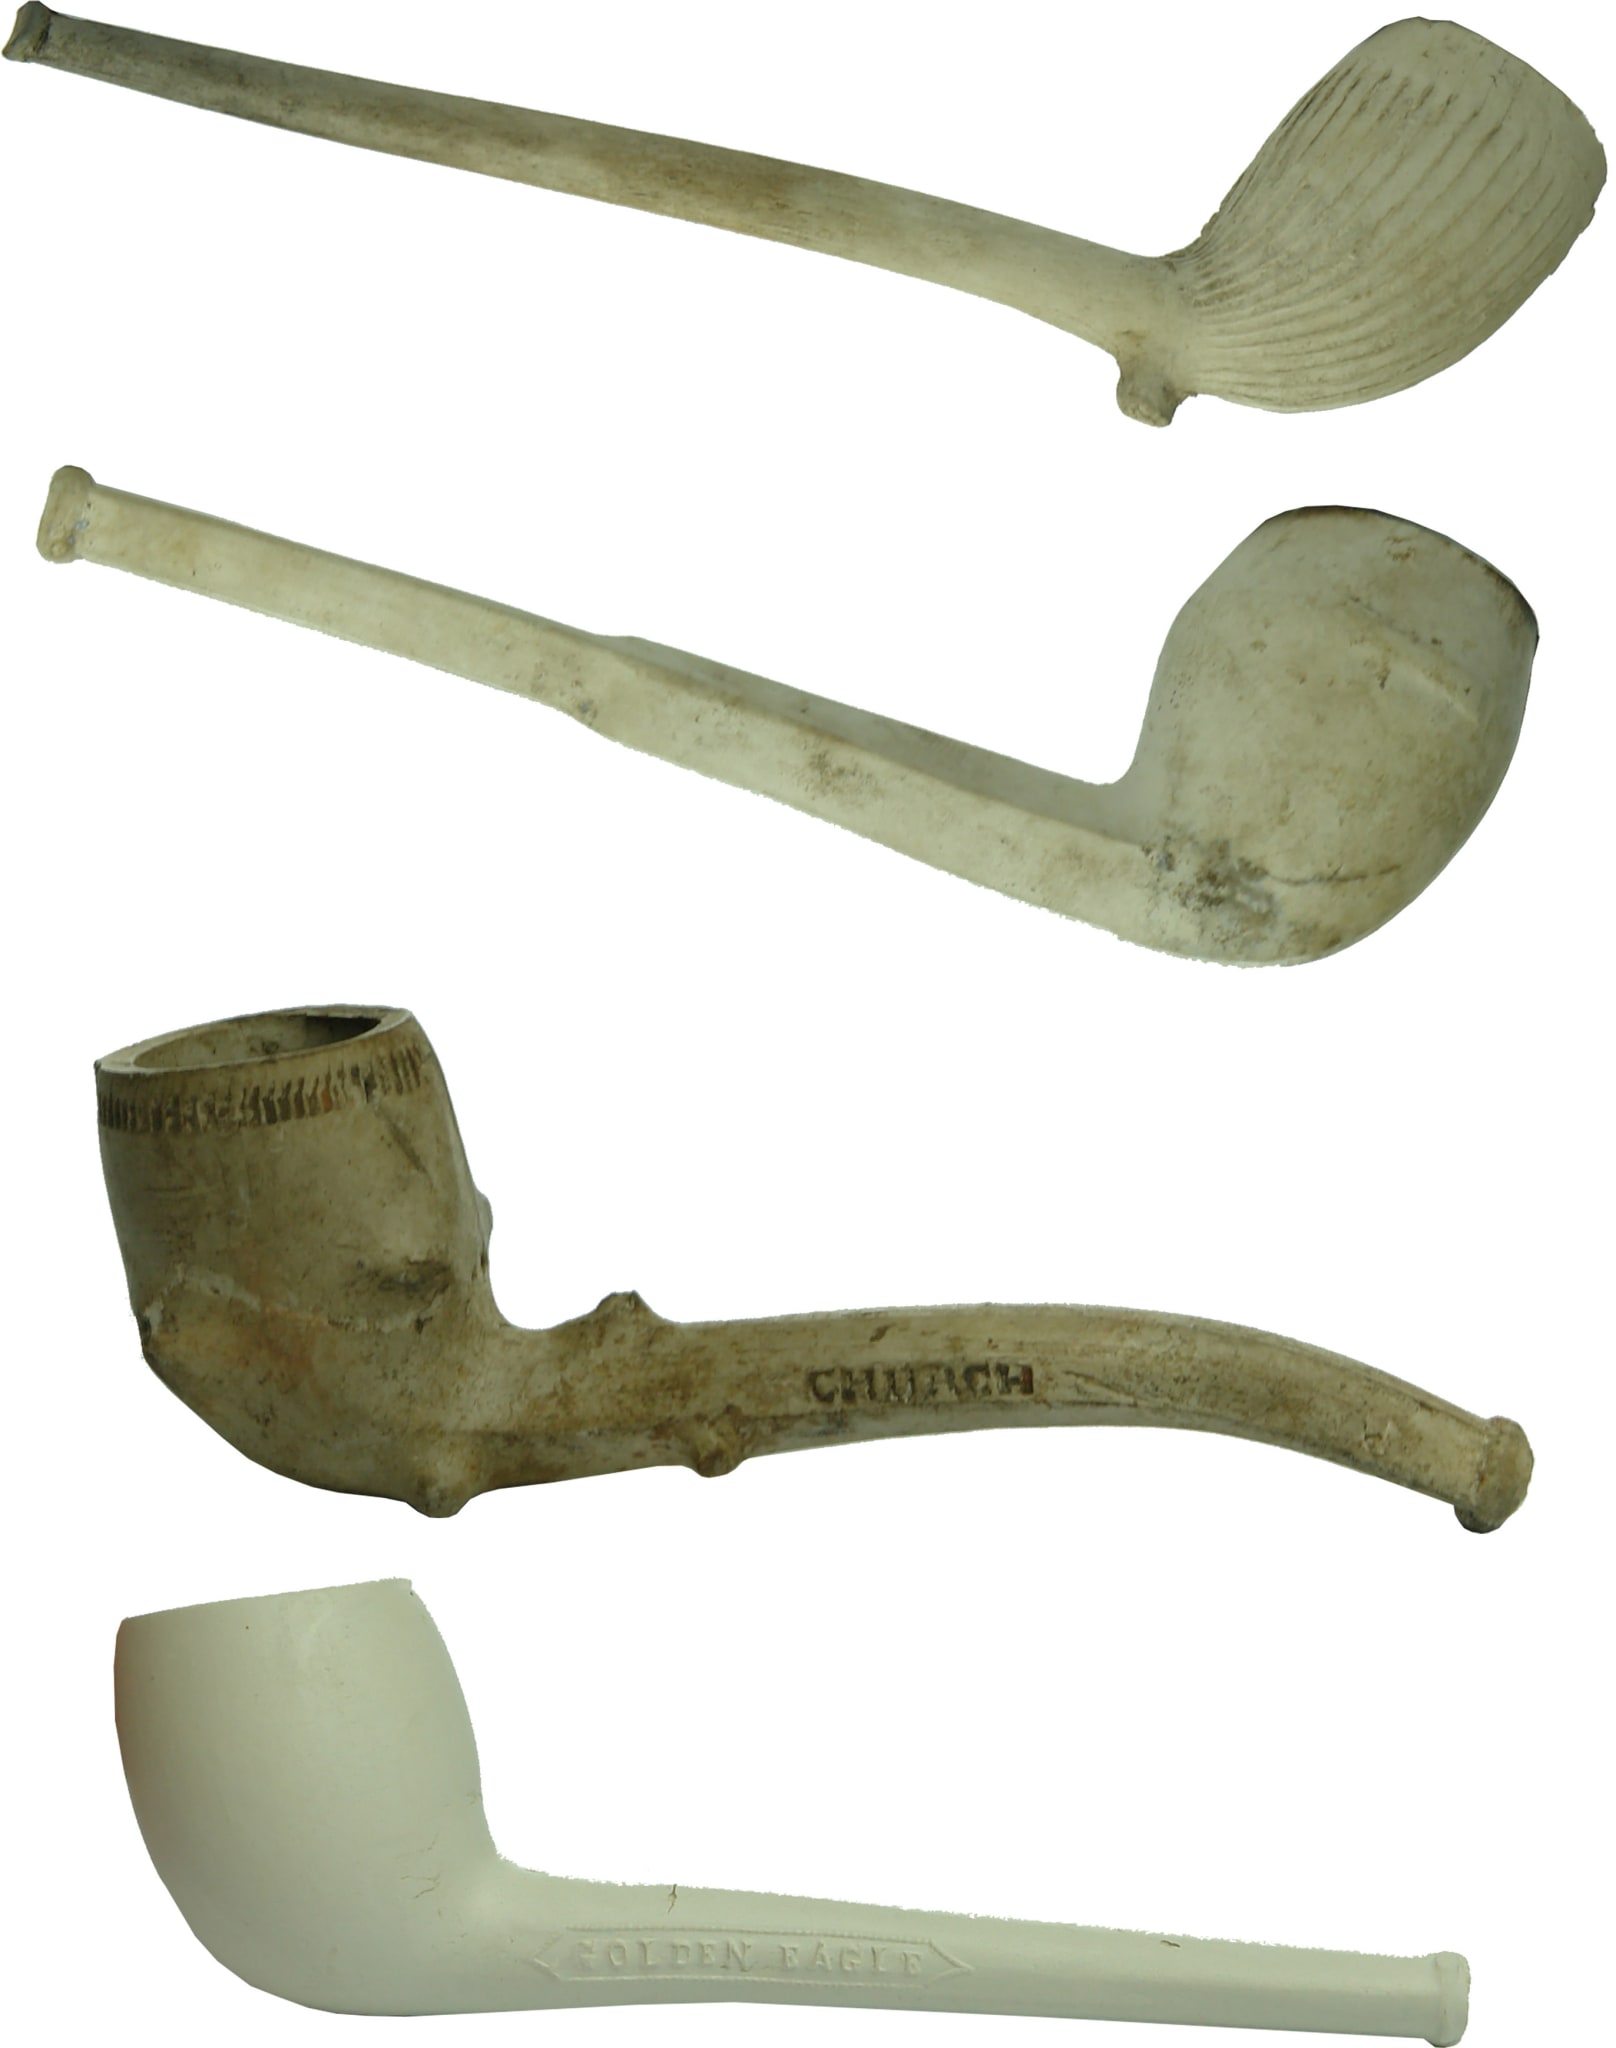 Antique Clay Pipes